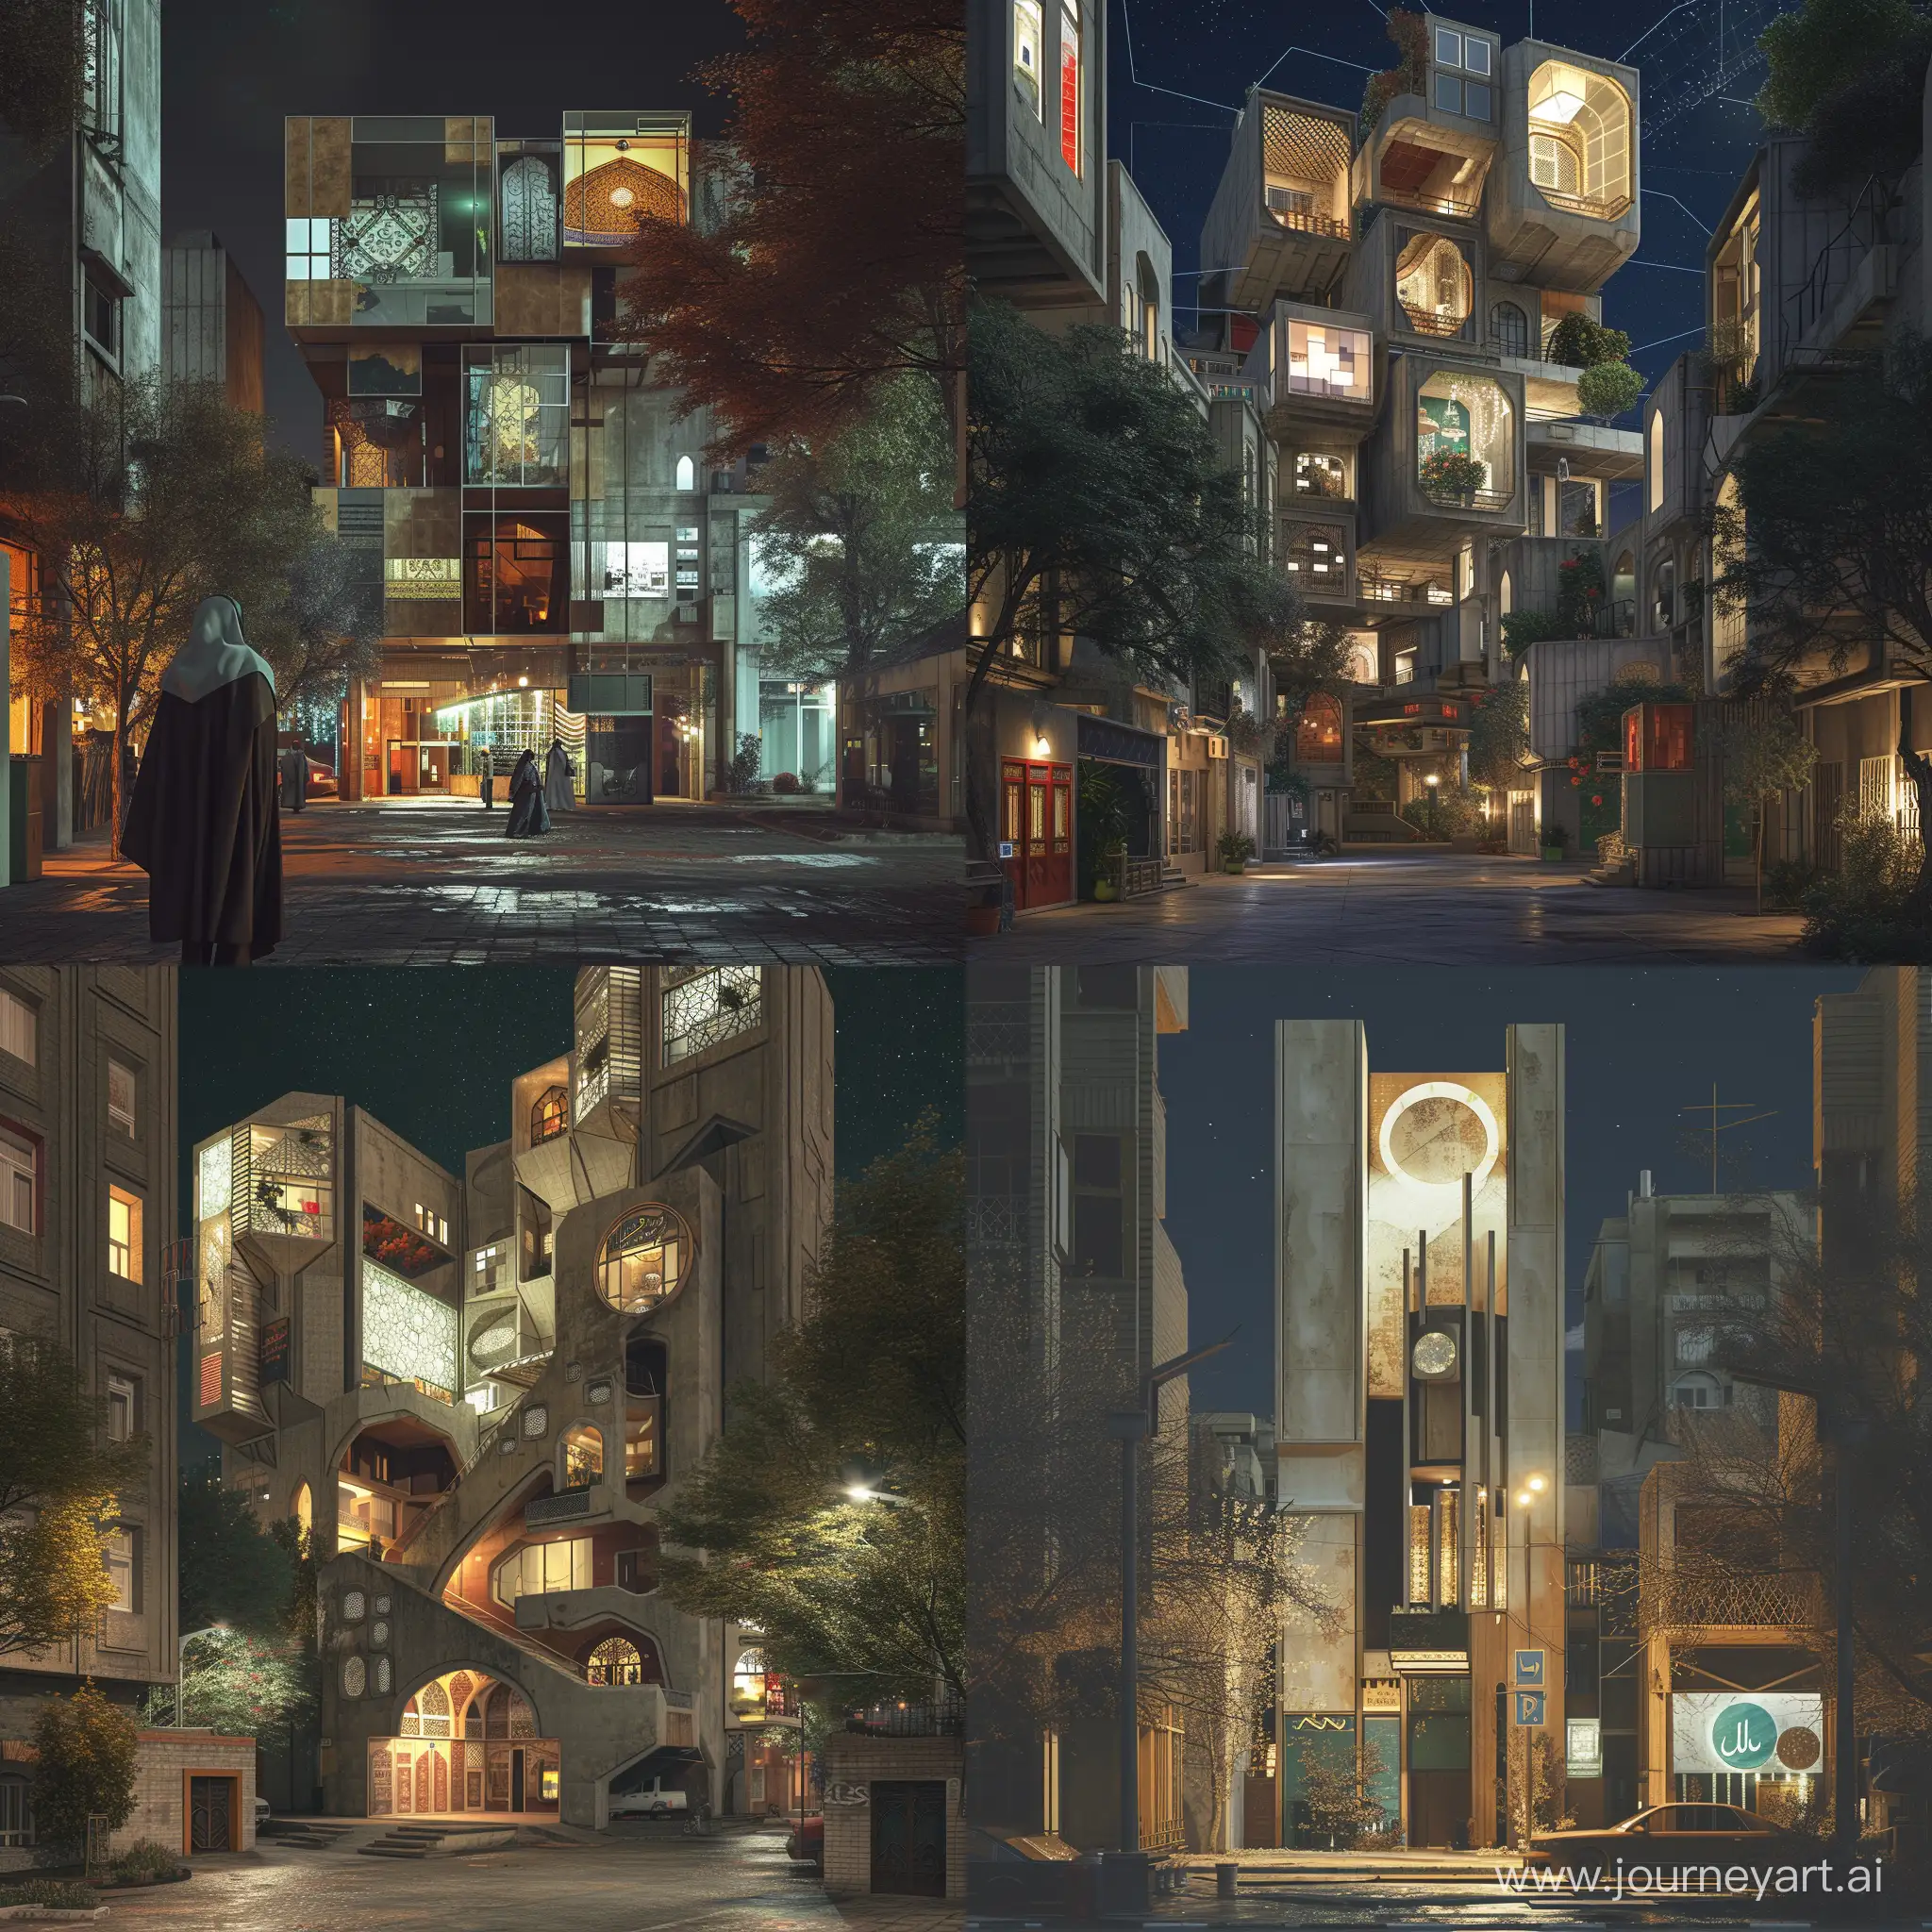 A collage architecture in the urban space of Tehran. Changes should not be exaggerated. A collage-like architecture can be seen in the buildings. Collage can be an indoctrination of futuristic architecture and maybe Islamic architecture. Images will be displayed at night.  The output should be displayed like a realistic photo.
